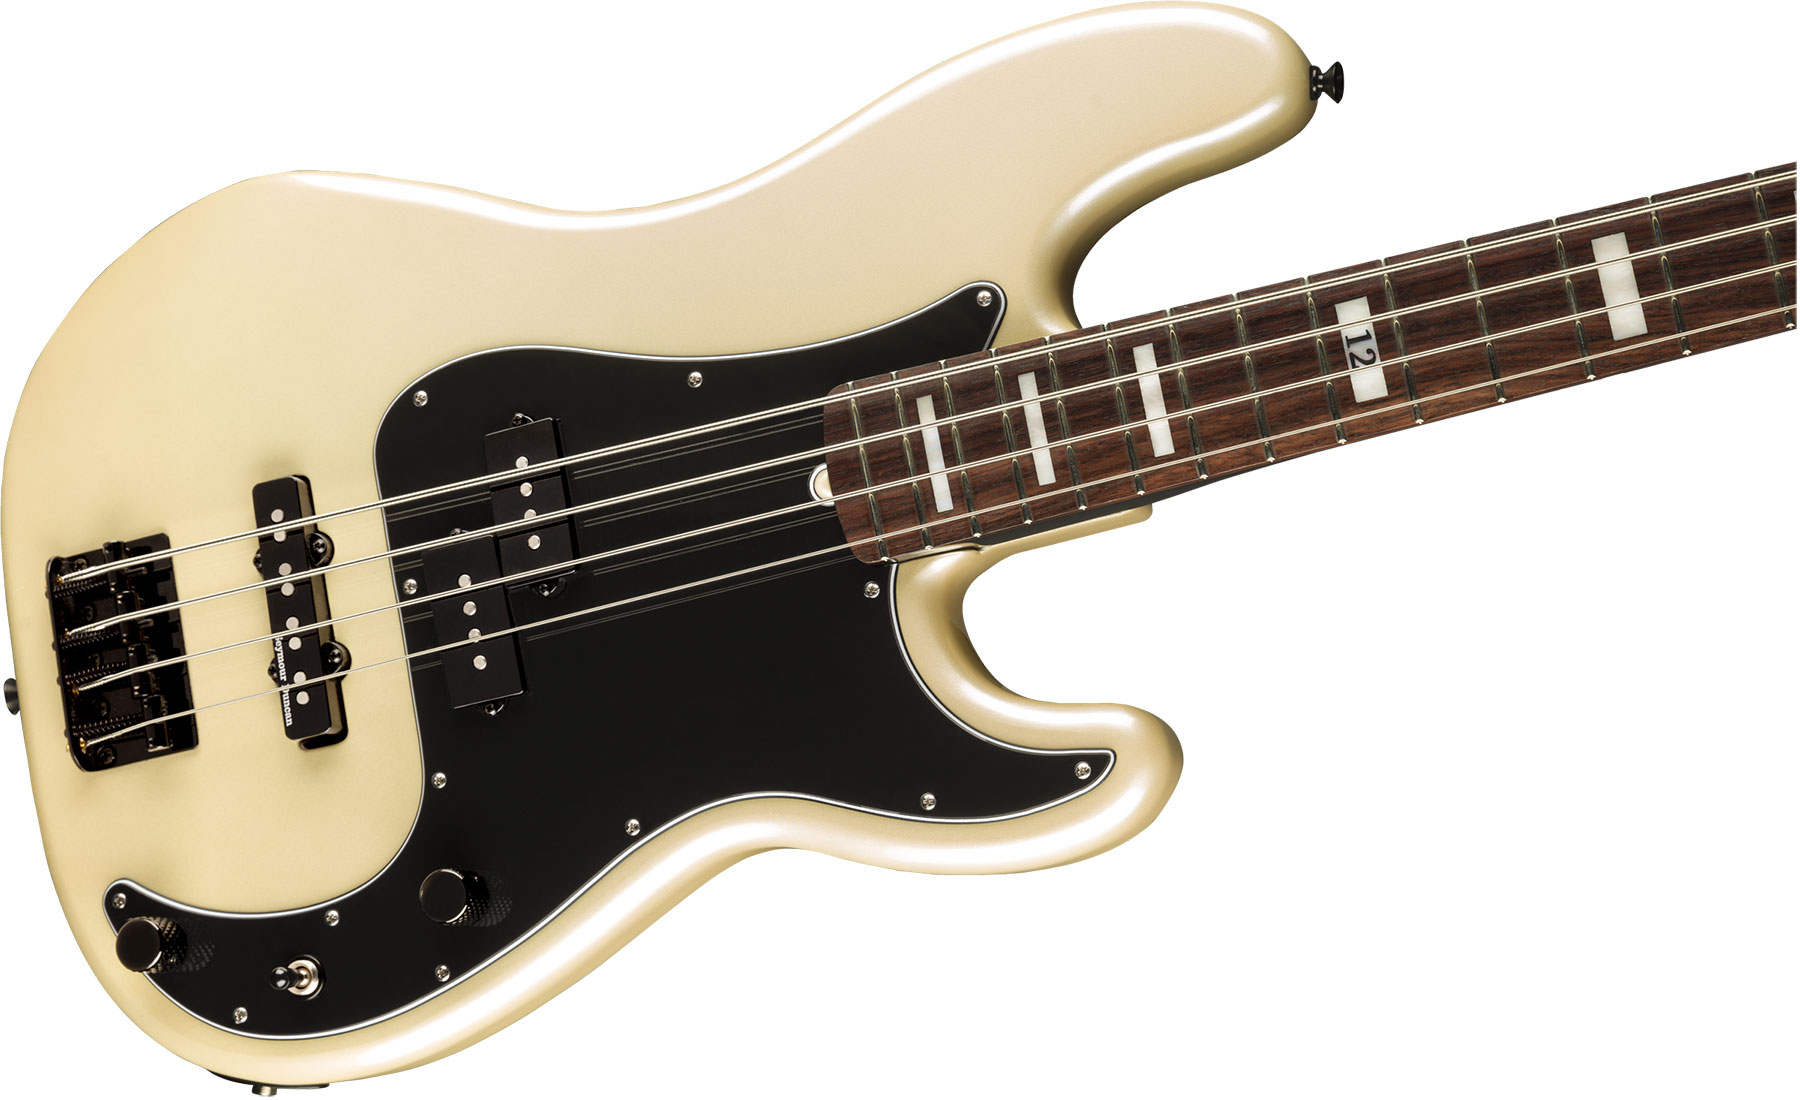 Fender Duff Mckagan Precision Bass Deluxe Signature Rw - White Pearl - Solid body electric bass - Variation 2